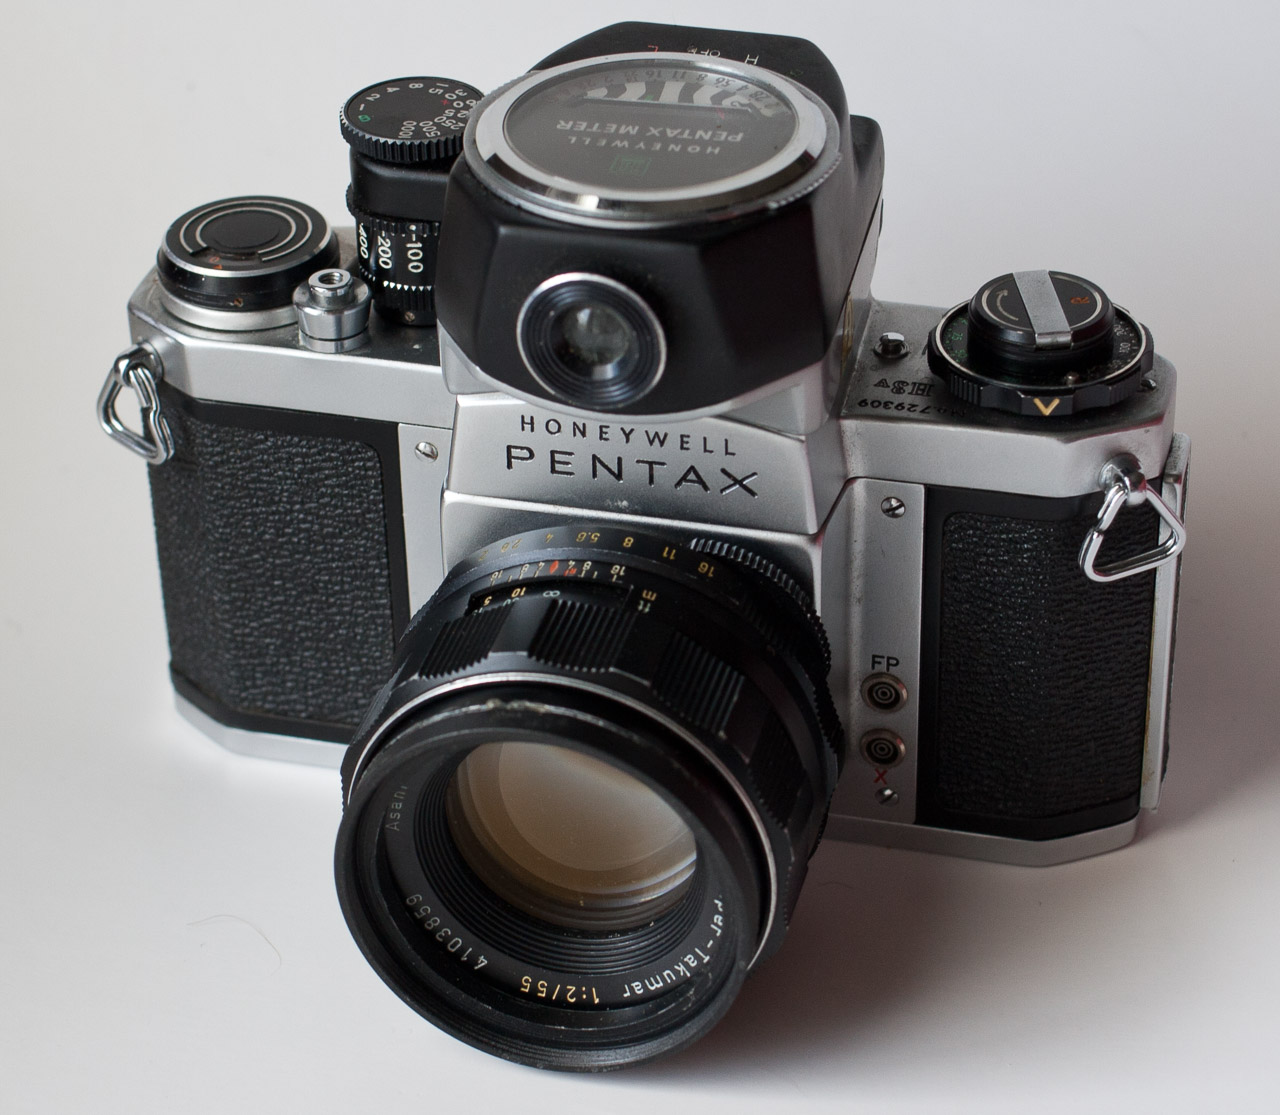 an old fashioned pentax camera with its focus on the lens